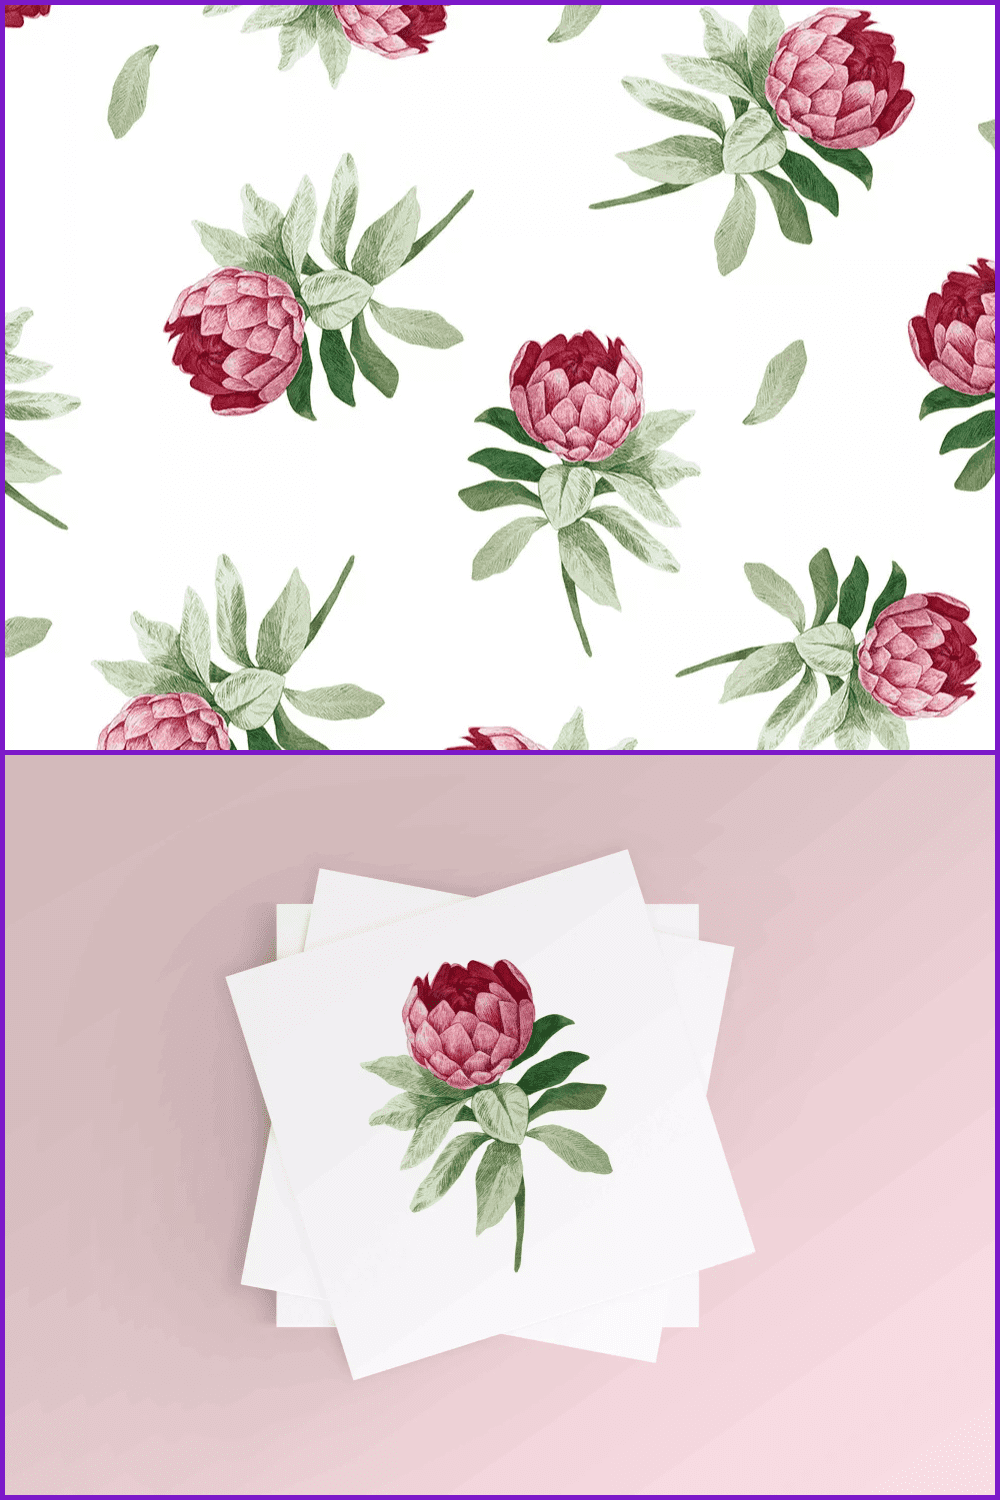 Collage with soft pink flower and bunches of leaves.